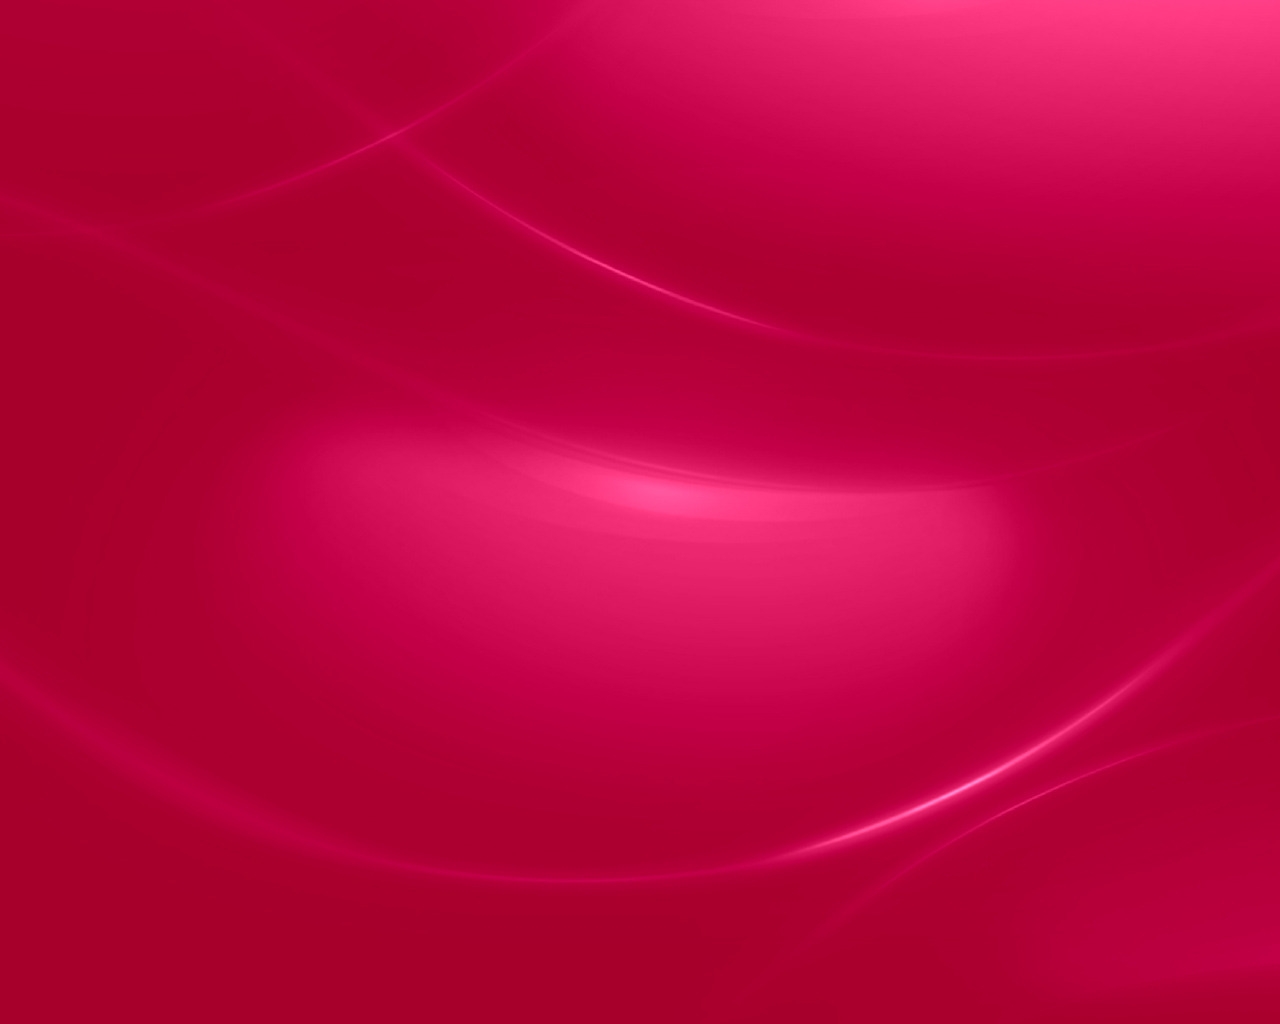 Minimal Pink Waves for 1280 x 1024 resolution